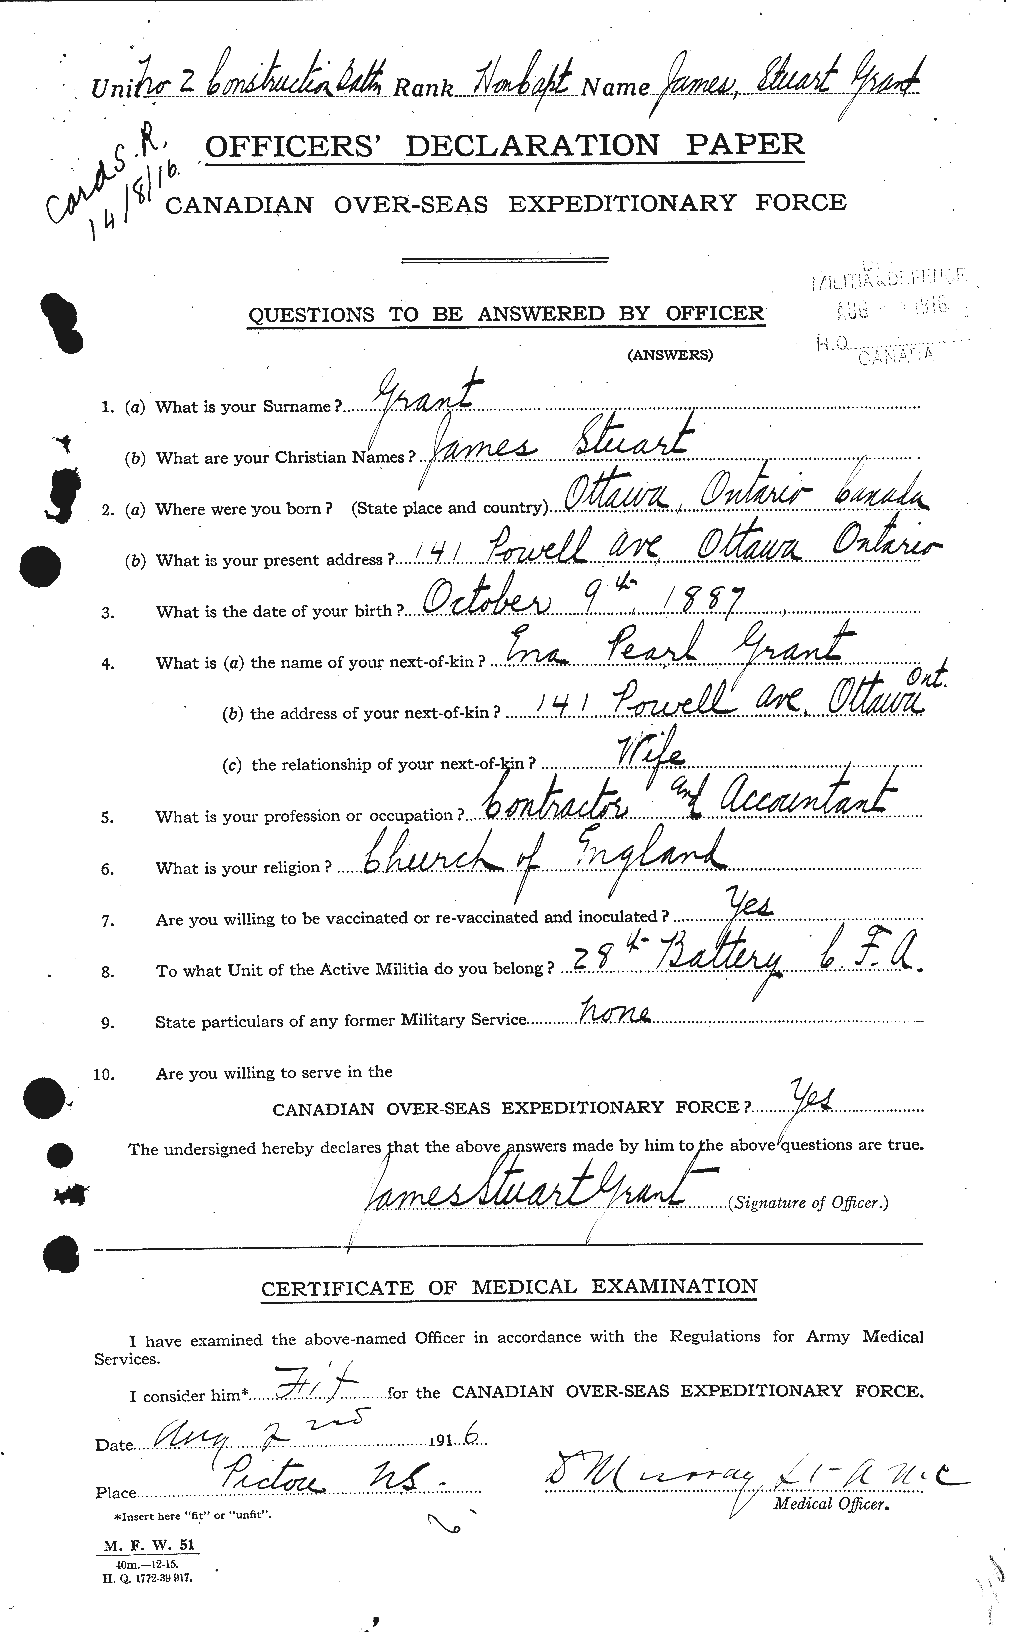 Personnel Records of the First World War - CEF 357103a